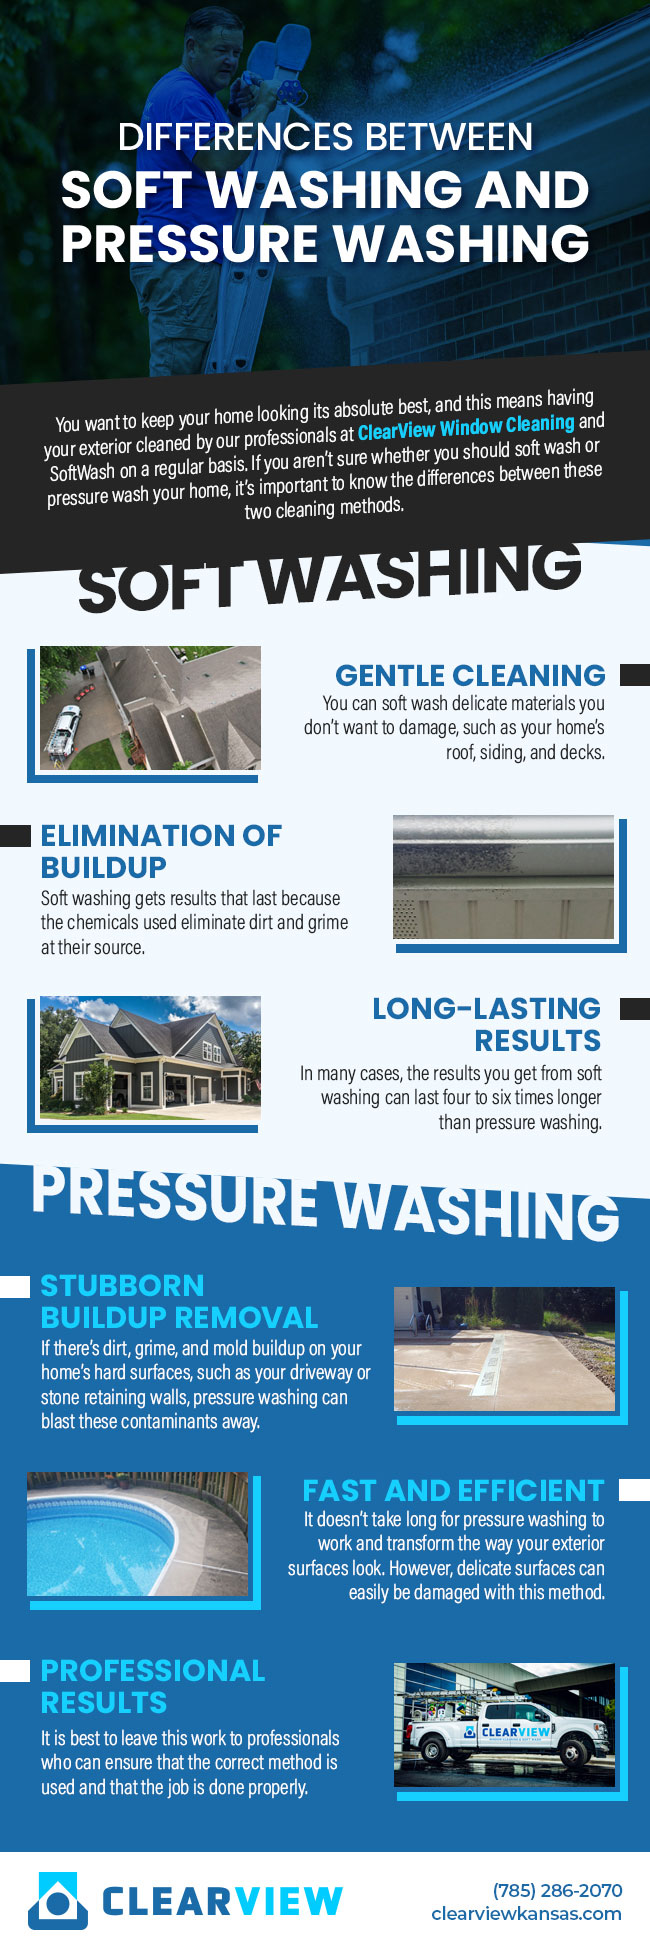 What’s the Difference Between Soft Washing and Pressure Washing?